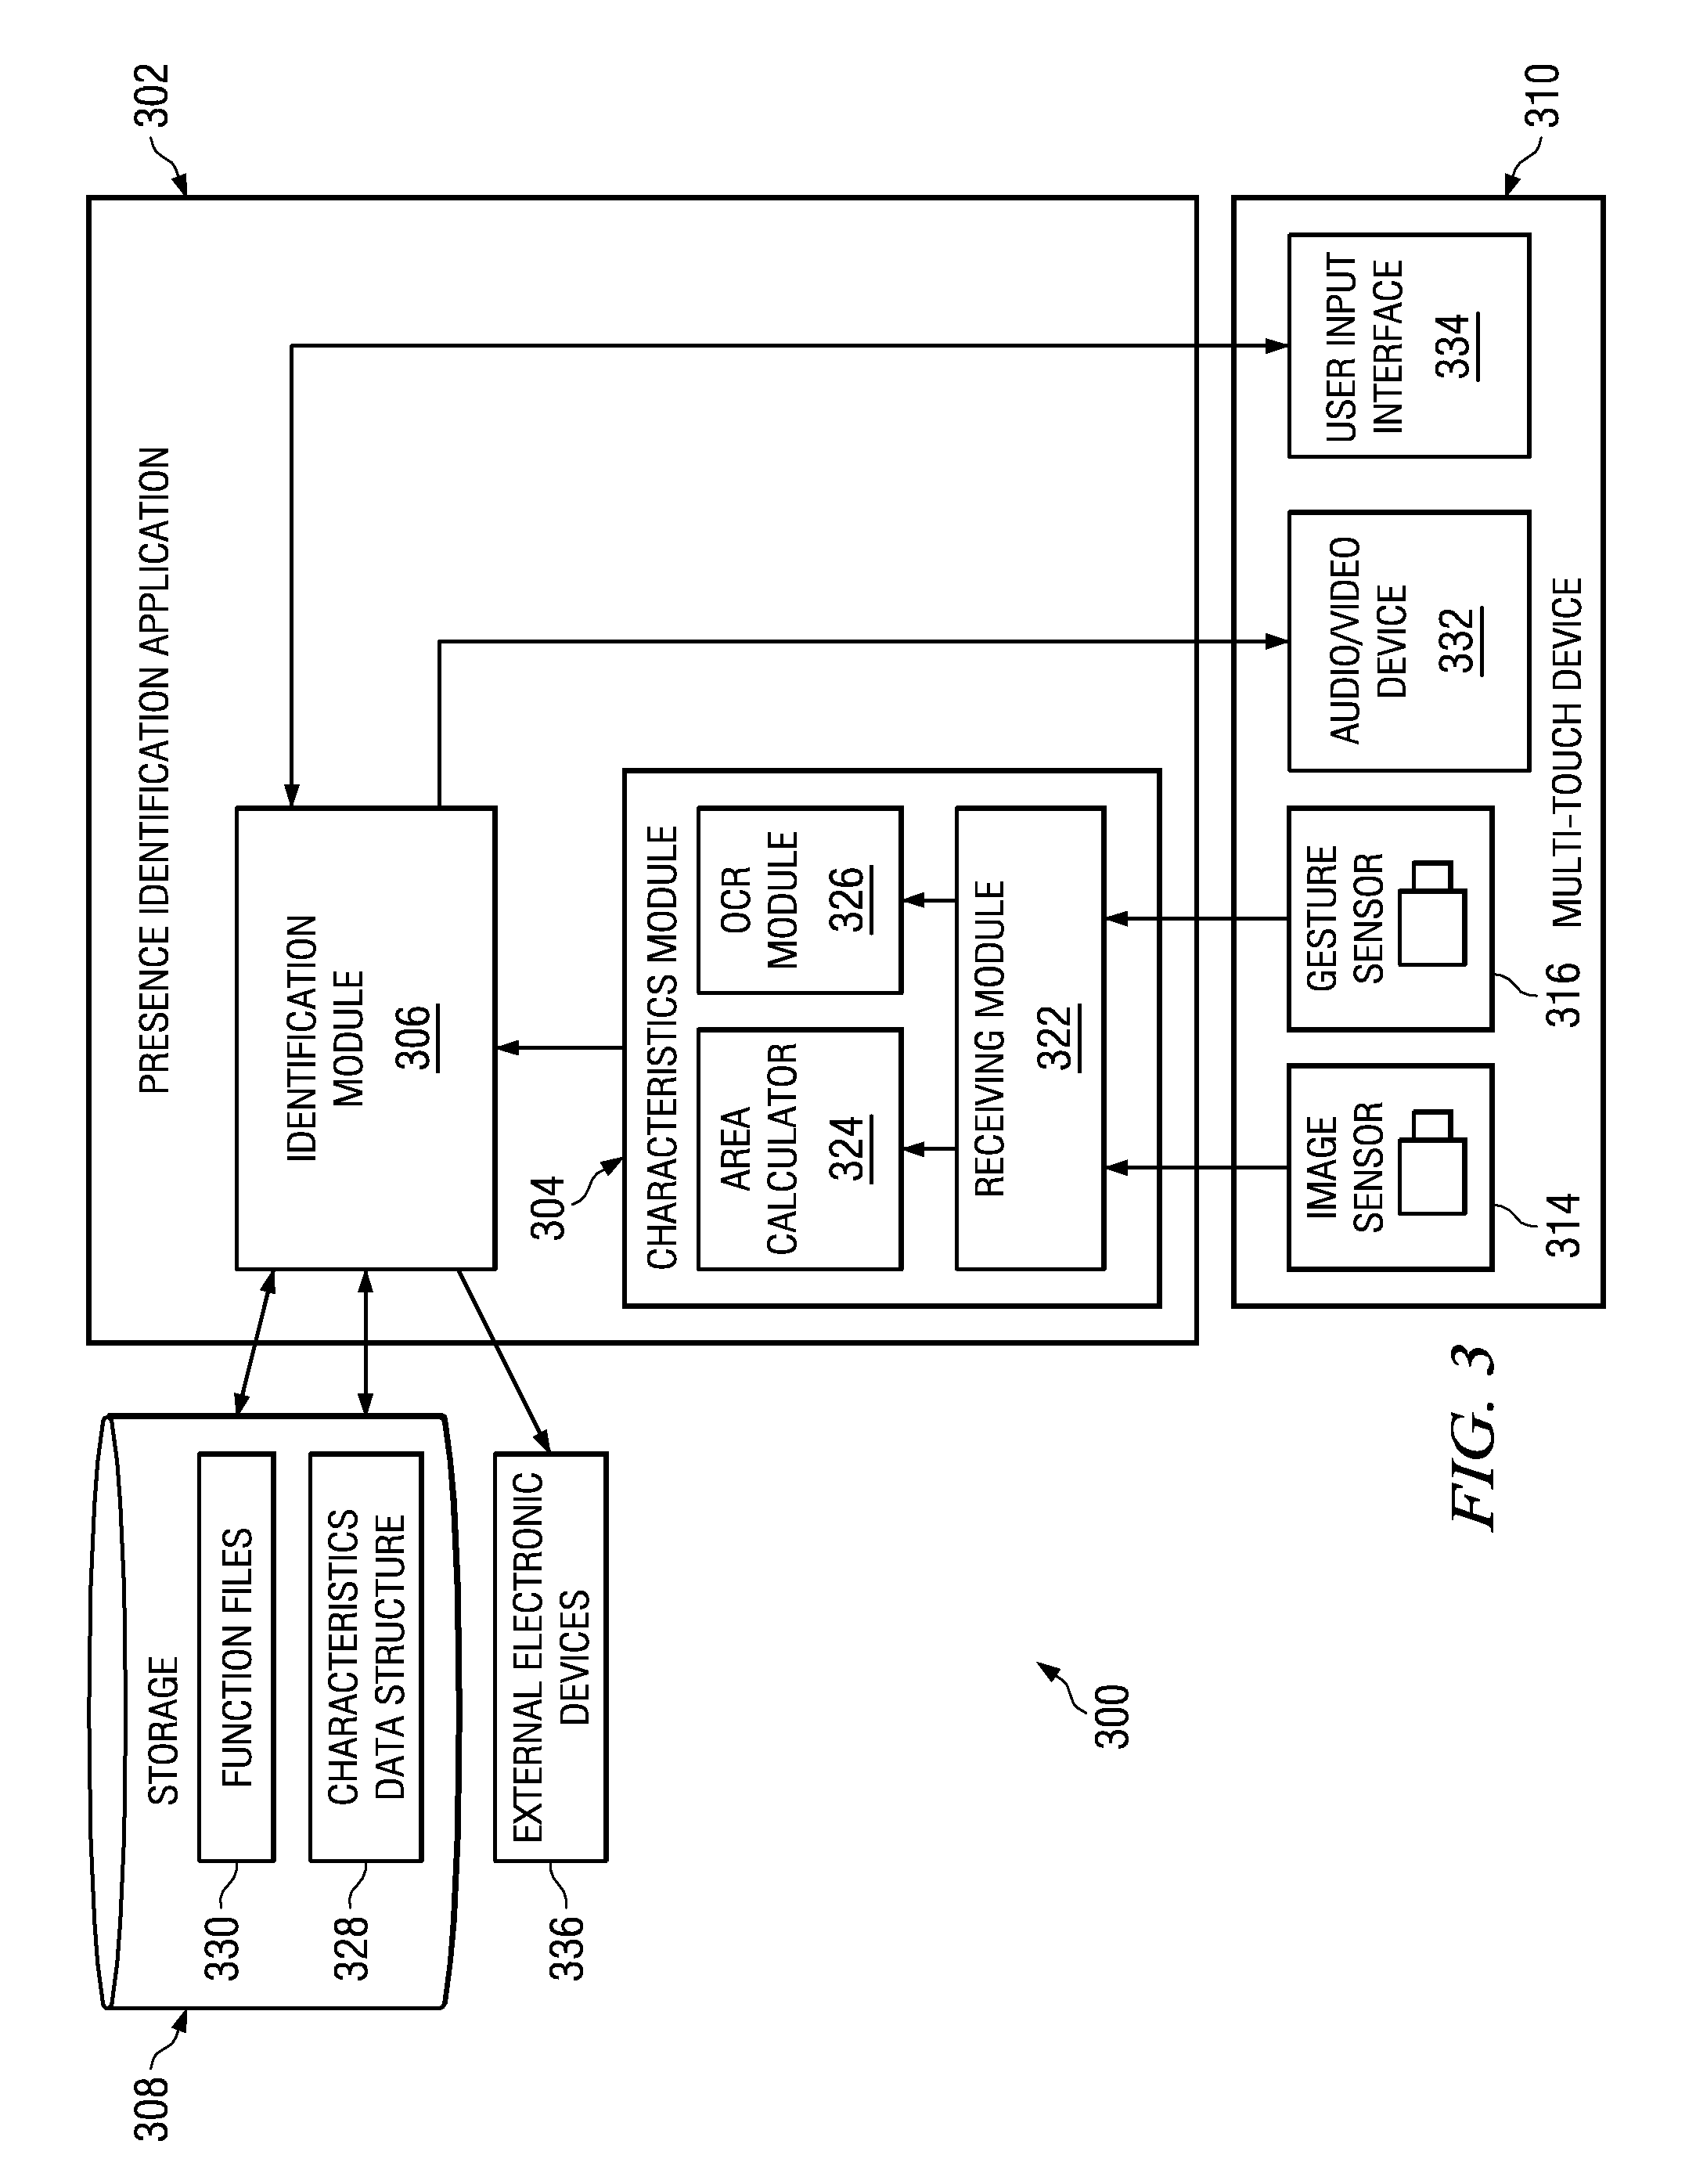 Presence recognition control of electronic devices using a multi-touch device